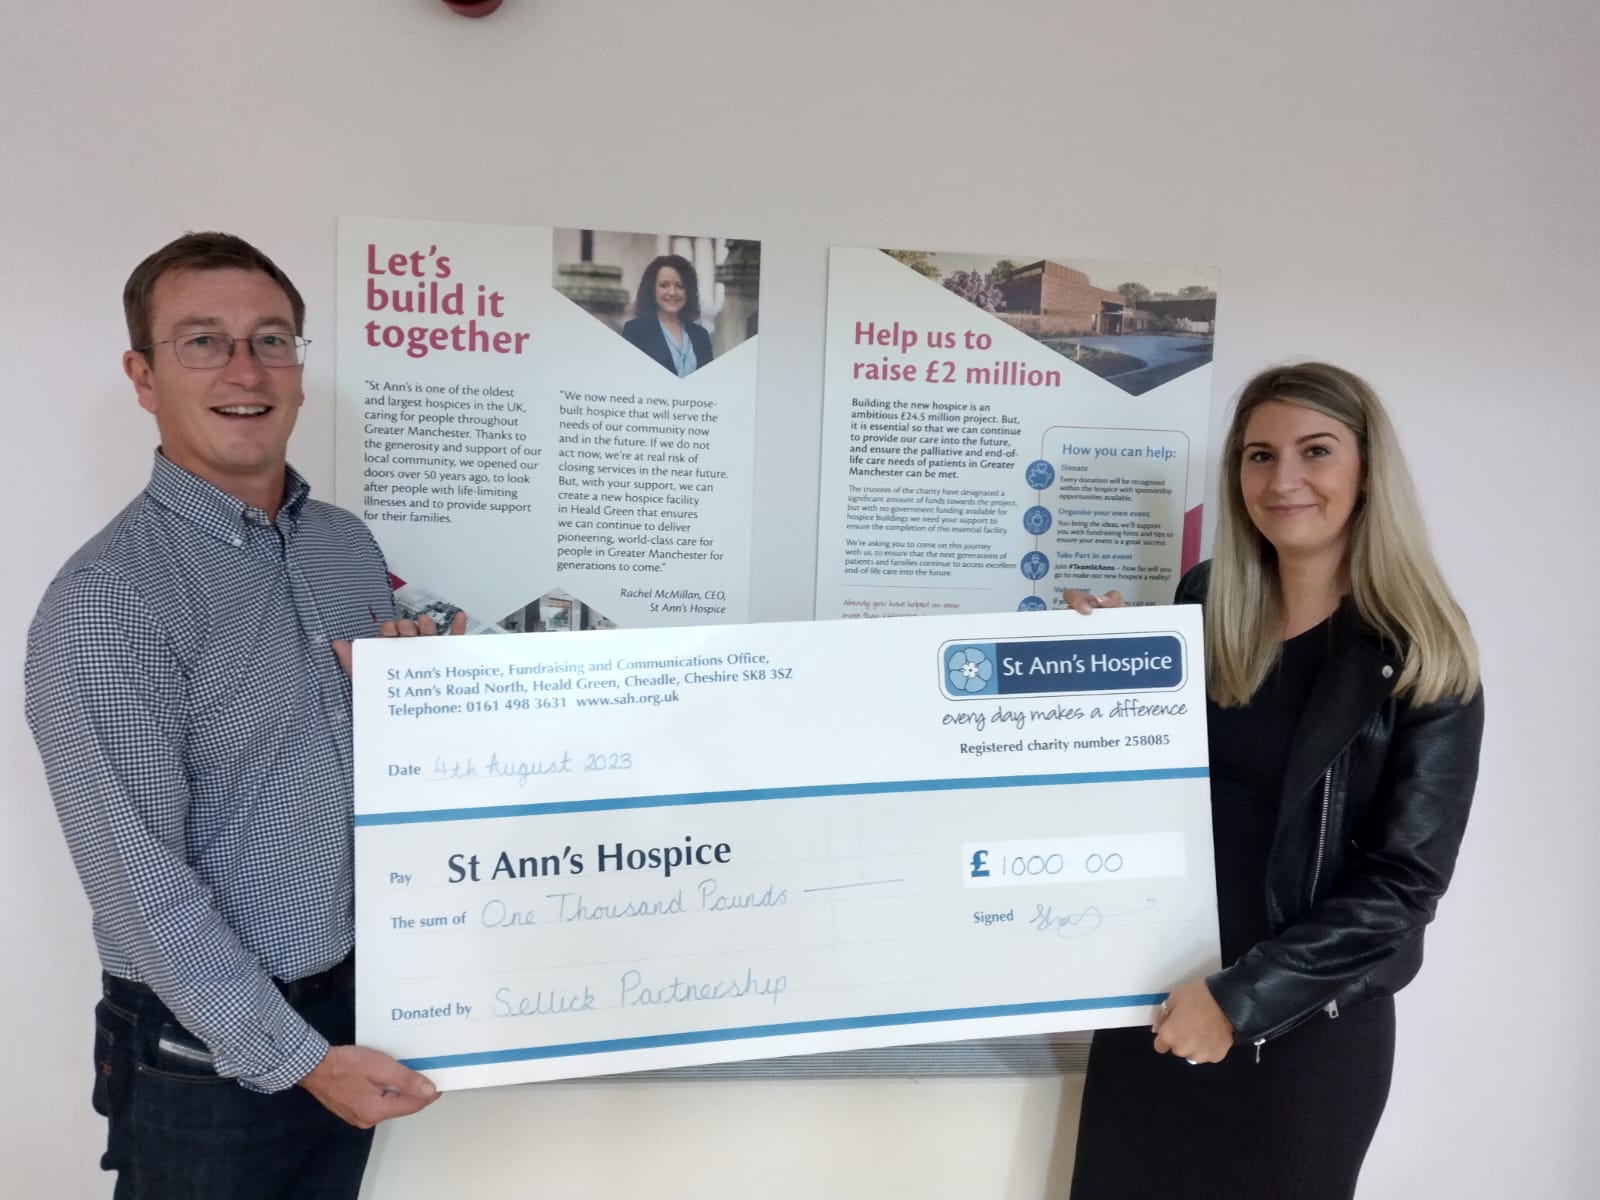 Group Director Ray Wareing (L) and Senior Marketing Executive Samantha Hattersley (R) visited us to present us with a cheque.